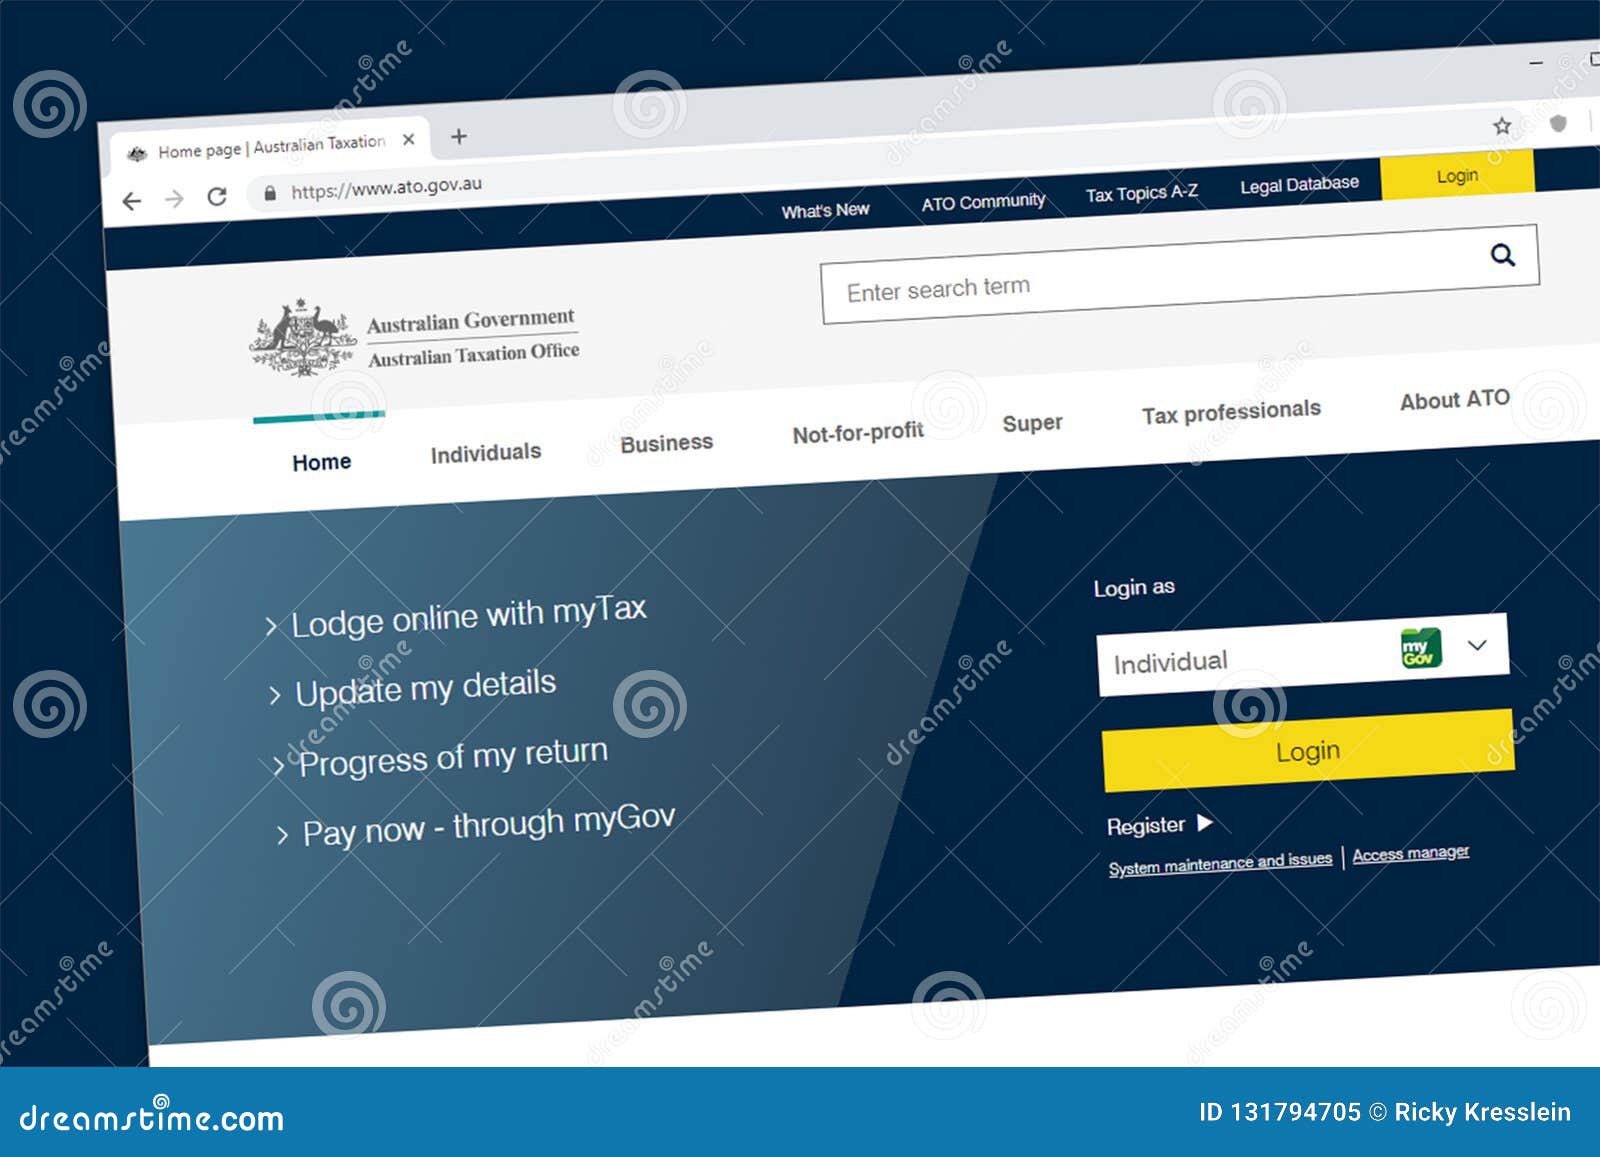 Australian Taxation Office ATO Government Collection Website Homepage Image - Illustration of page, communication: 131794705